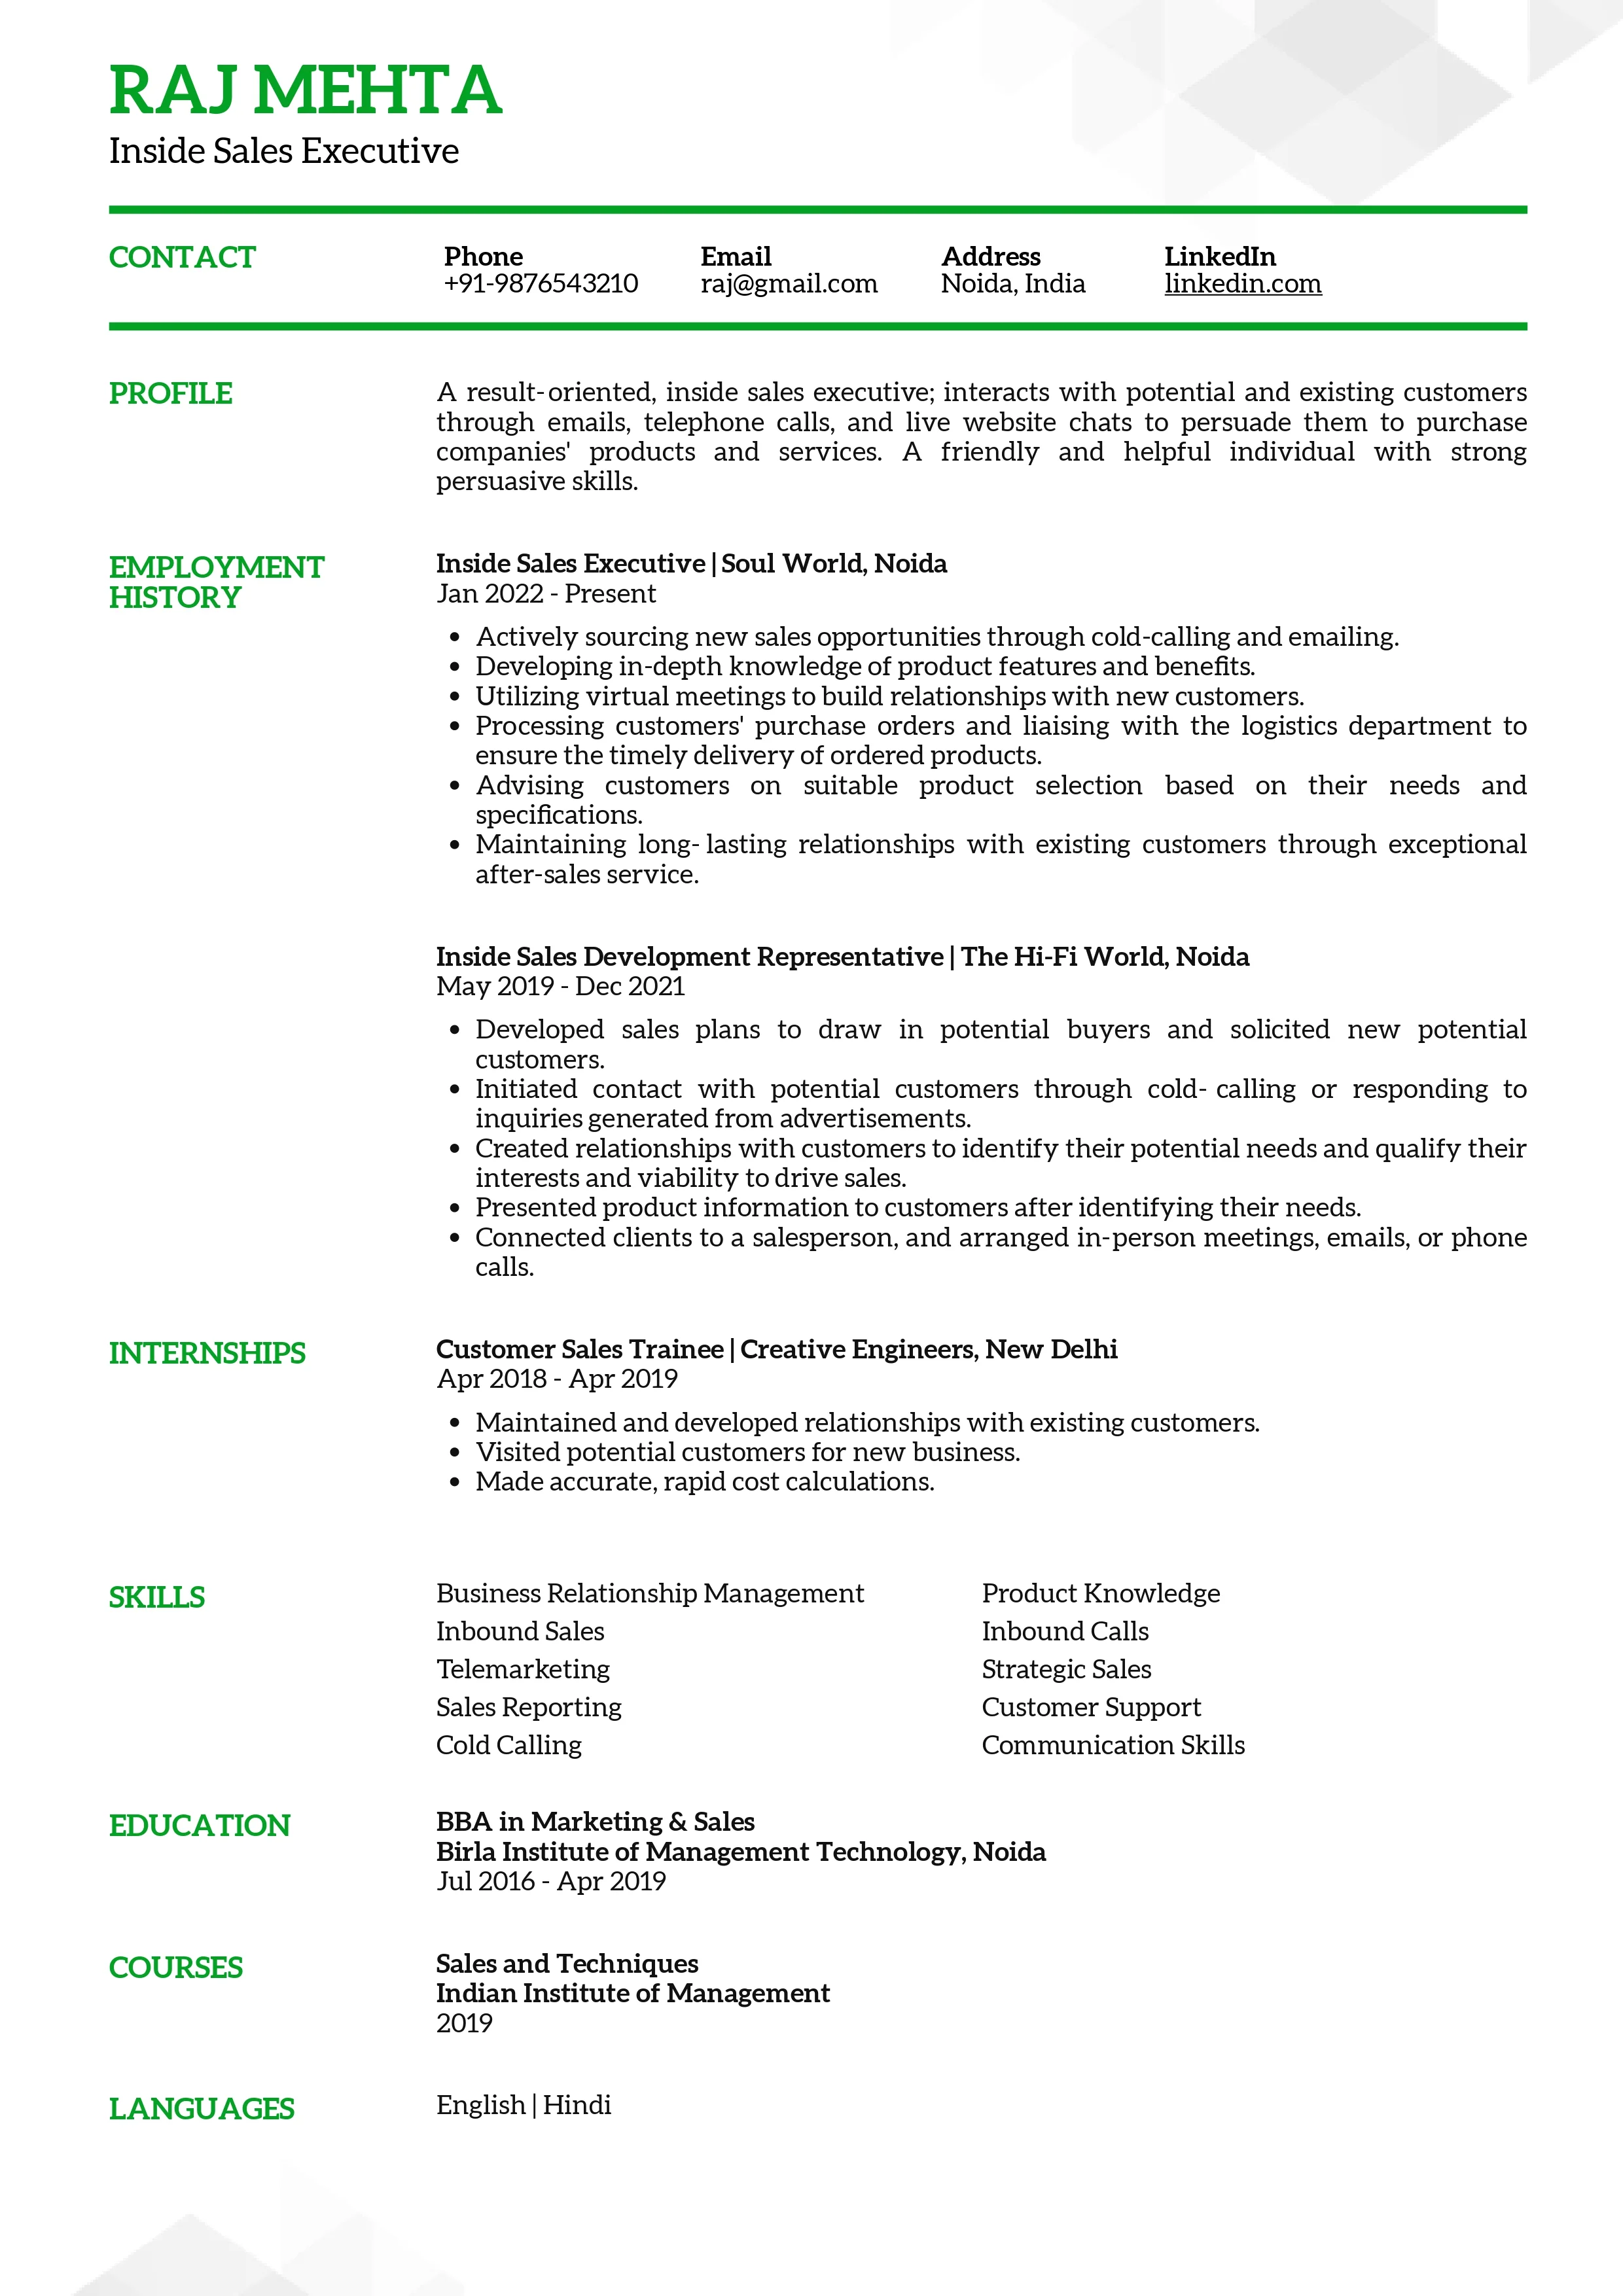 Sample Resume of Inside Sales Executive | Free Resume Templates & Samples on Resumod.co